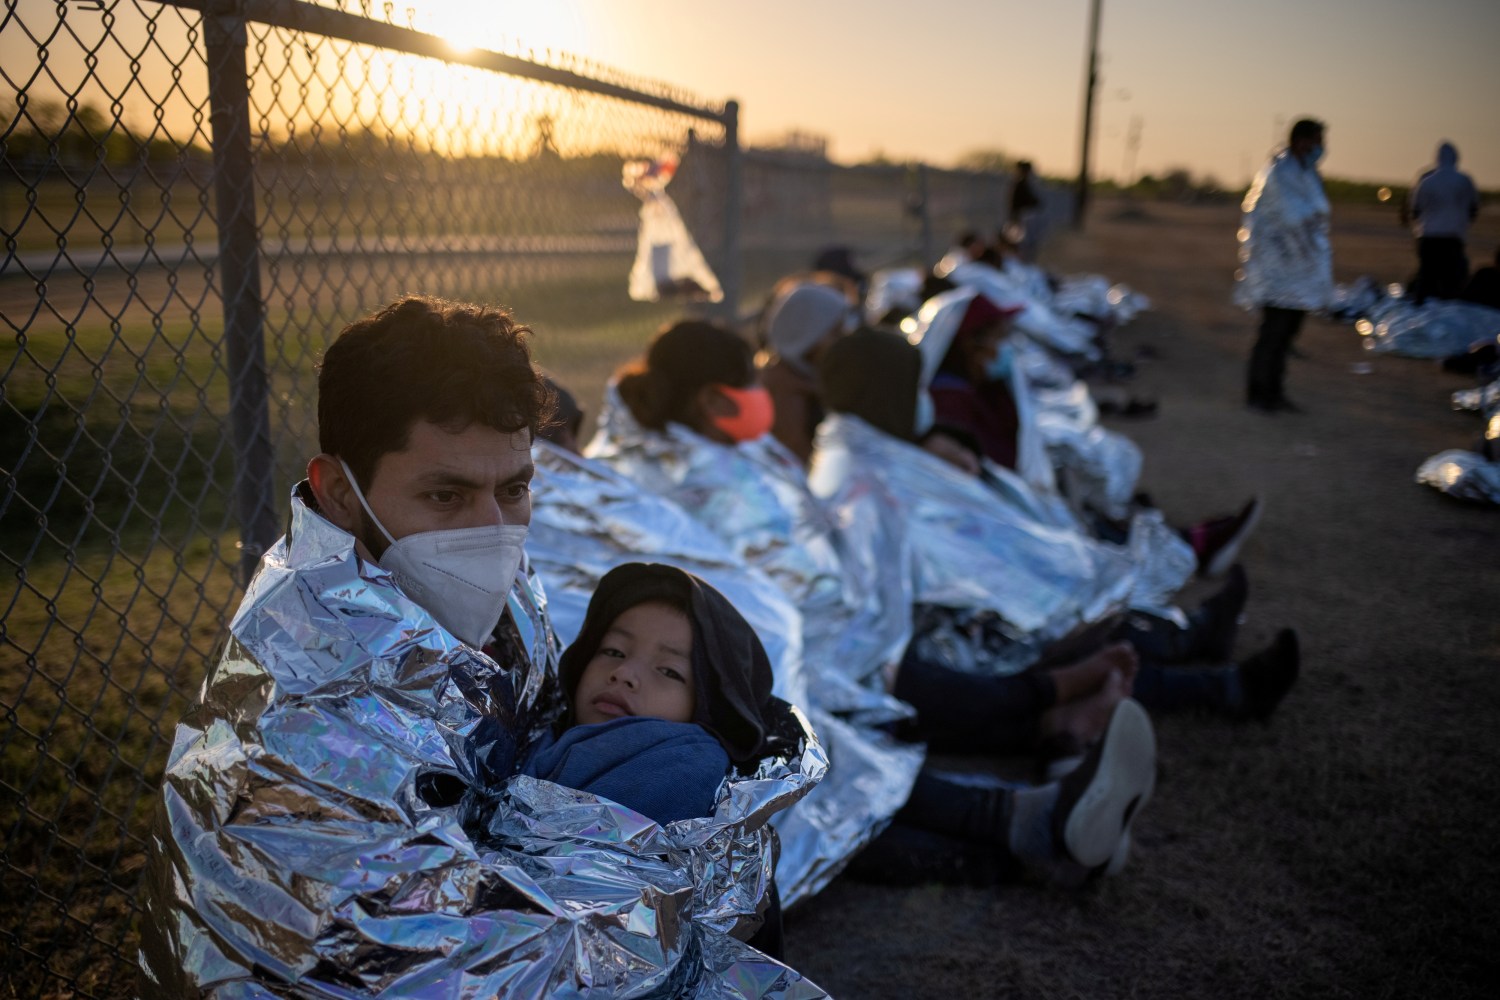 Dustin, an asylum-seeking migrant from Honduras, holds his six-year-old son Jerrardo, 6, as they awake at sunrise next to others who took refuge near a baseball field after crossing the Rio Grande river into the United States from Mexico on rafts, in La Joya, Texas, U.S., March 19, 2021. Emergency blankets were provided to the group of about 150 migrants from Central America by the U.S. Border Patrol agents. REUTERS/Adrees Latif     TPX IMAGES OF THE DAY